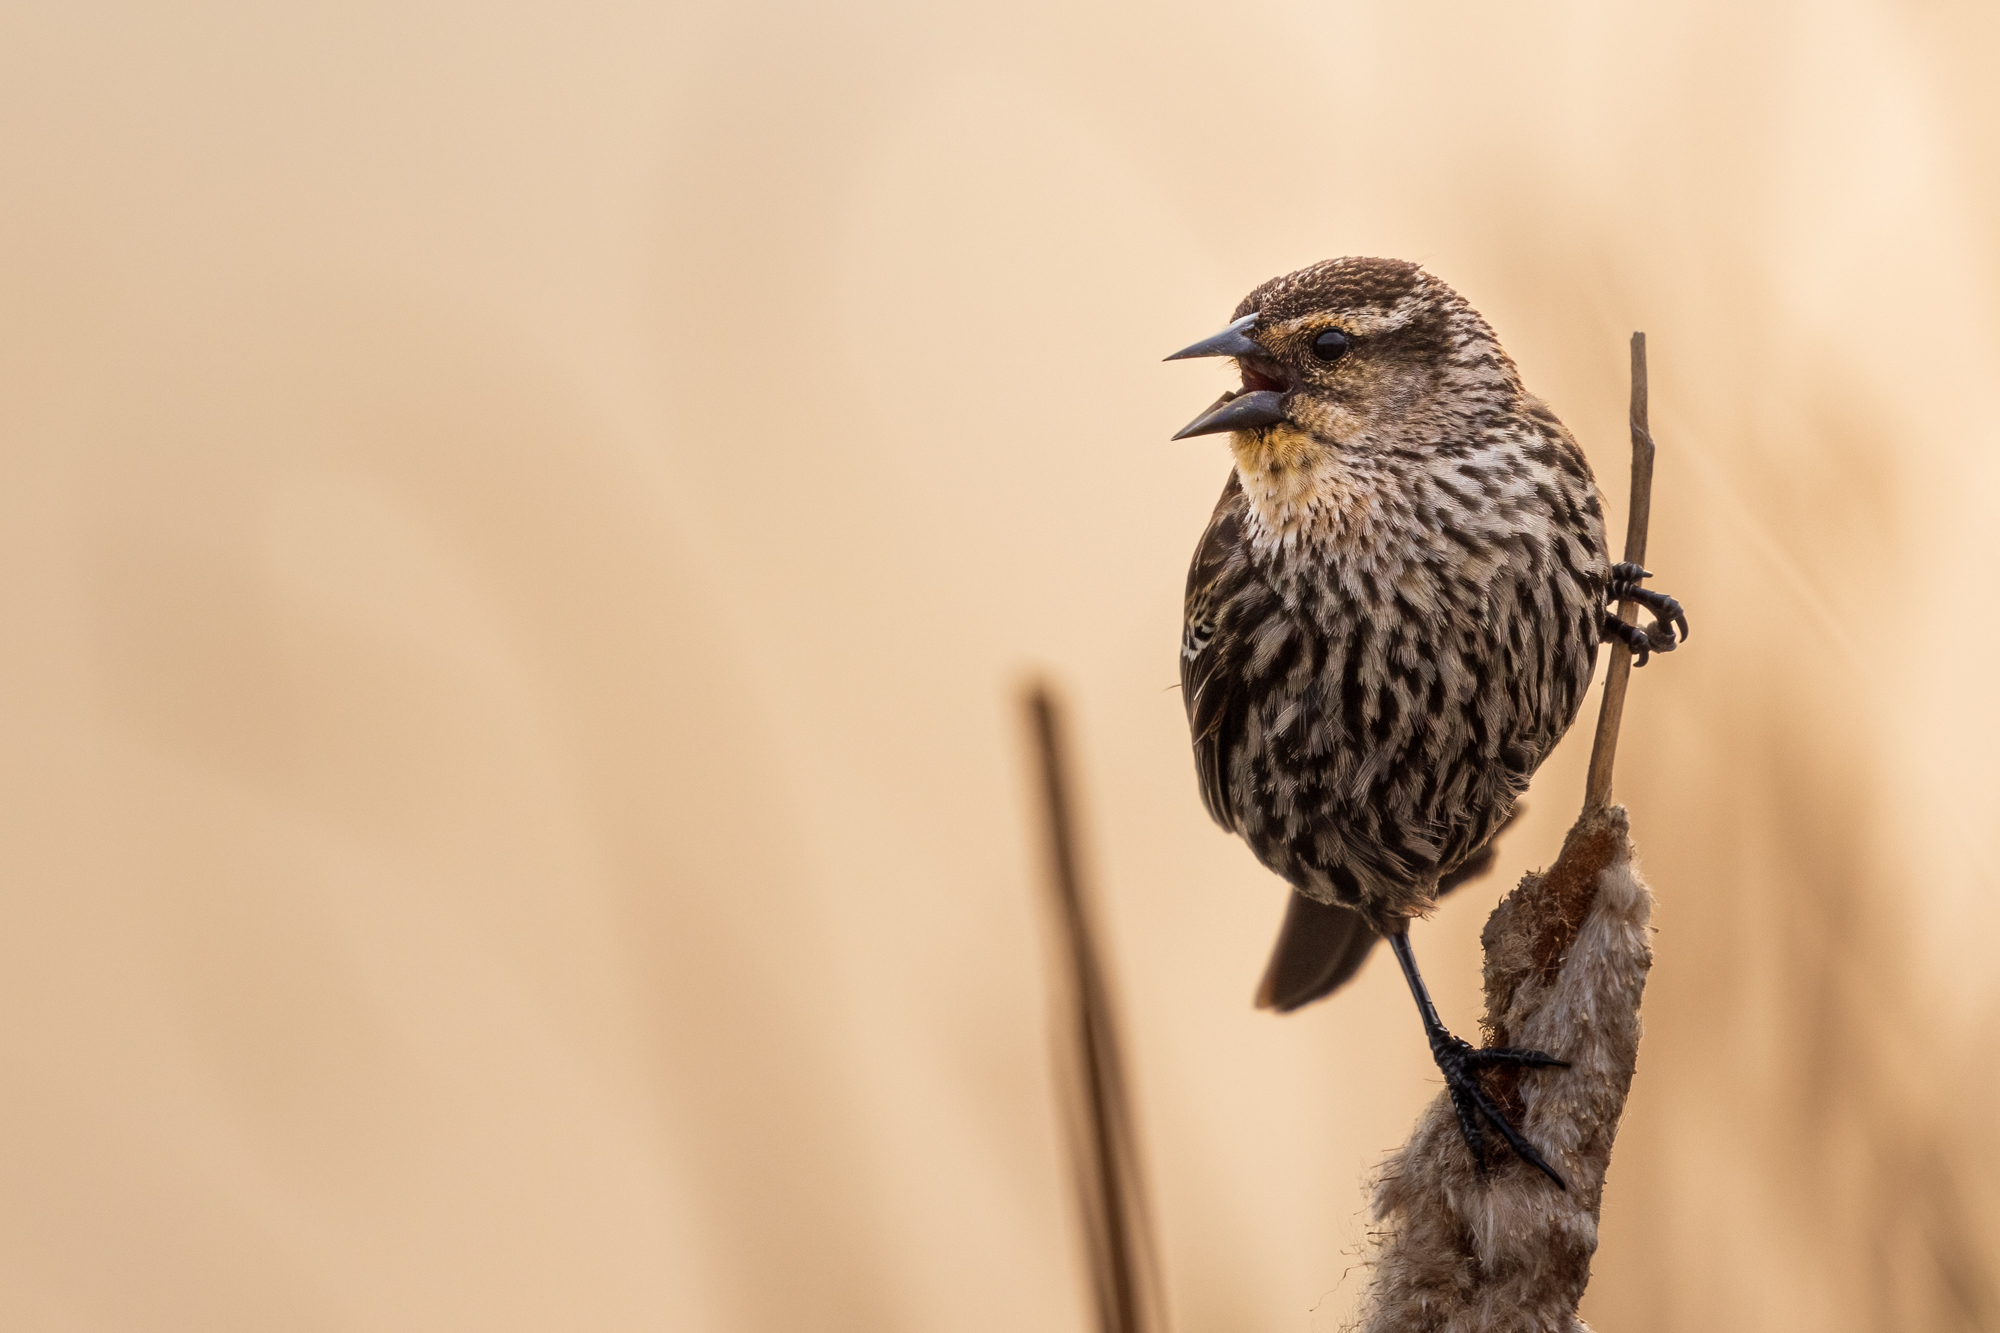 Female Red-winged Blackbird sitting on a cattail